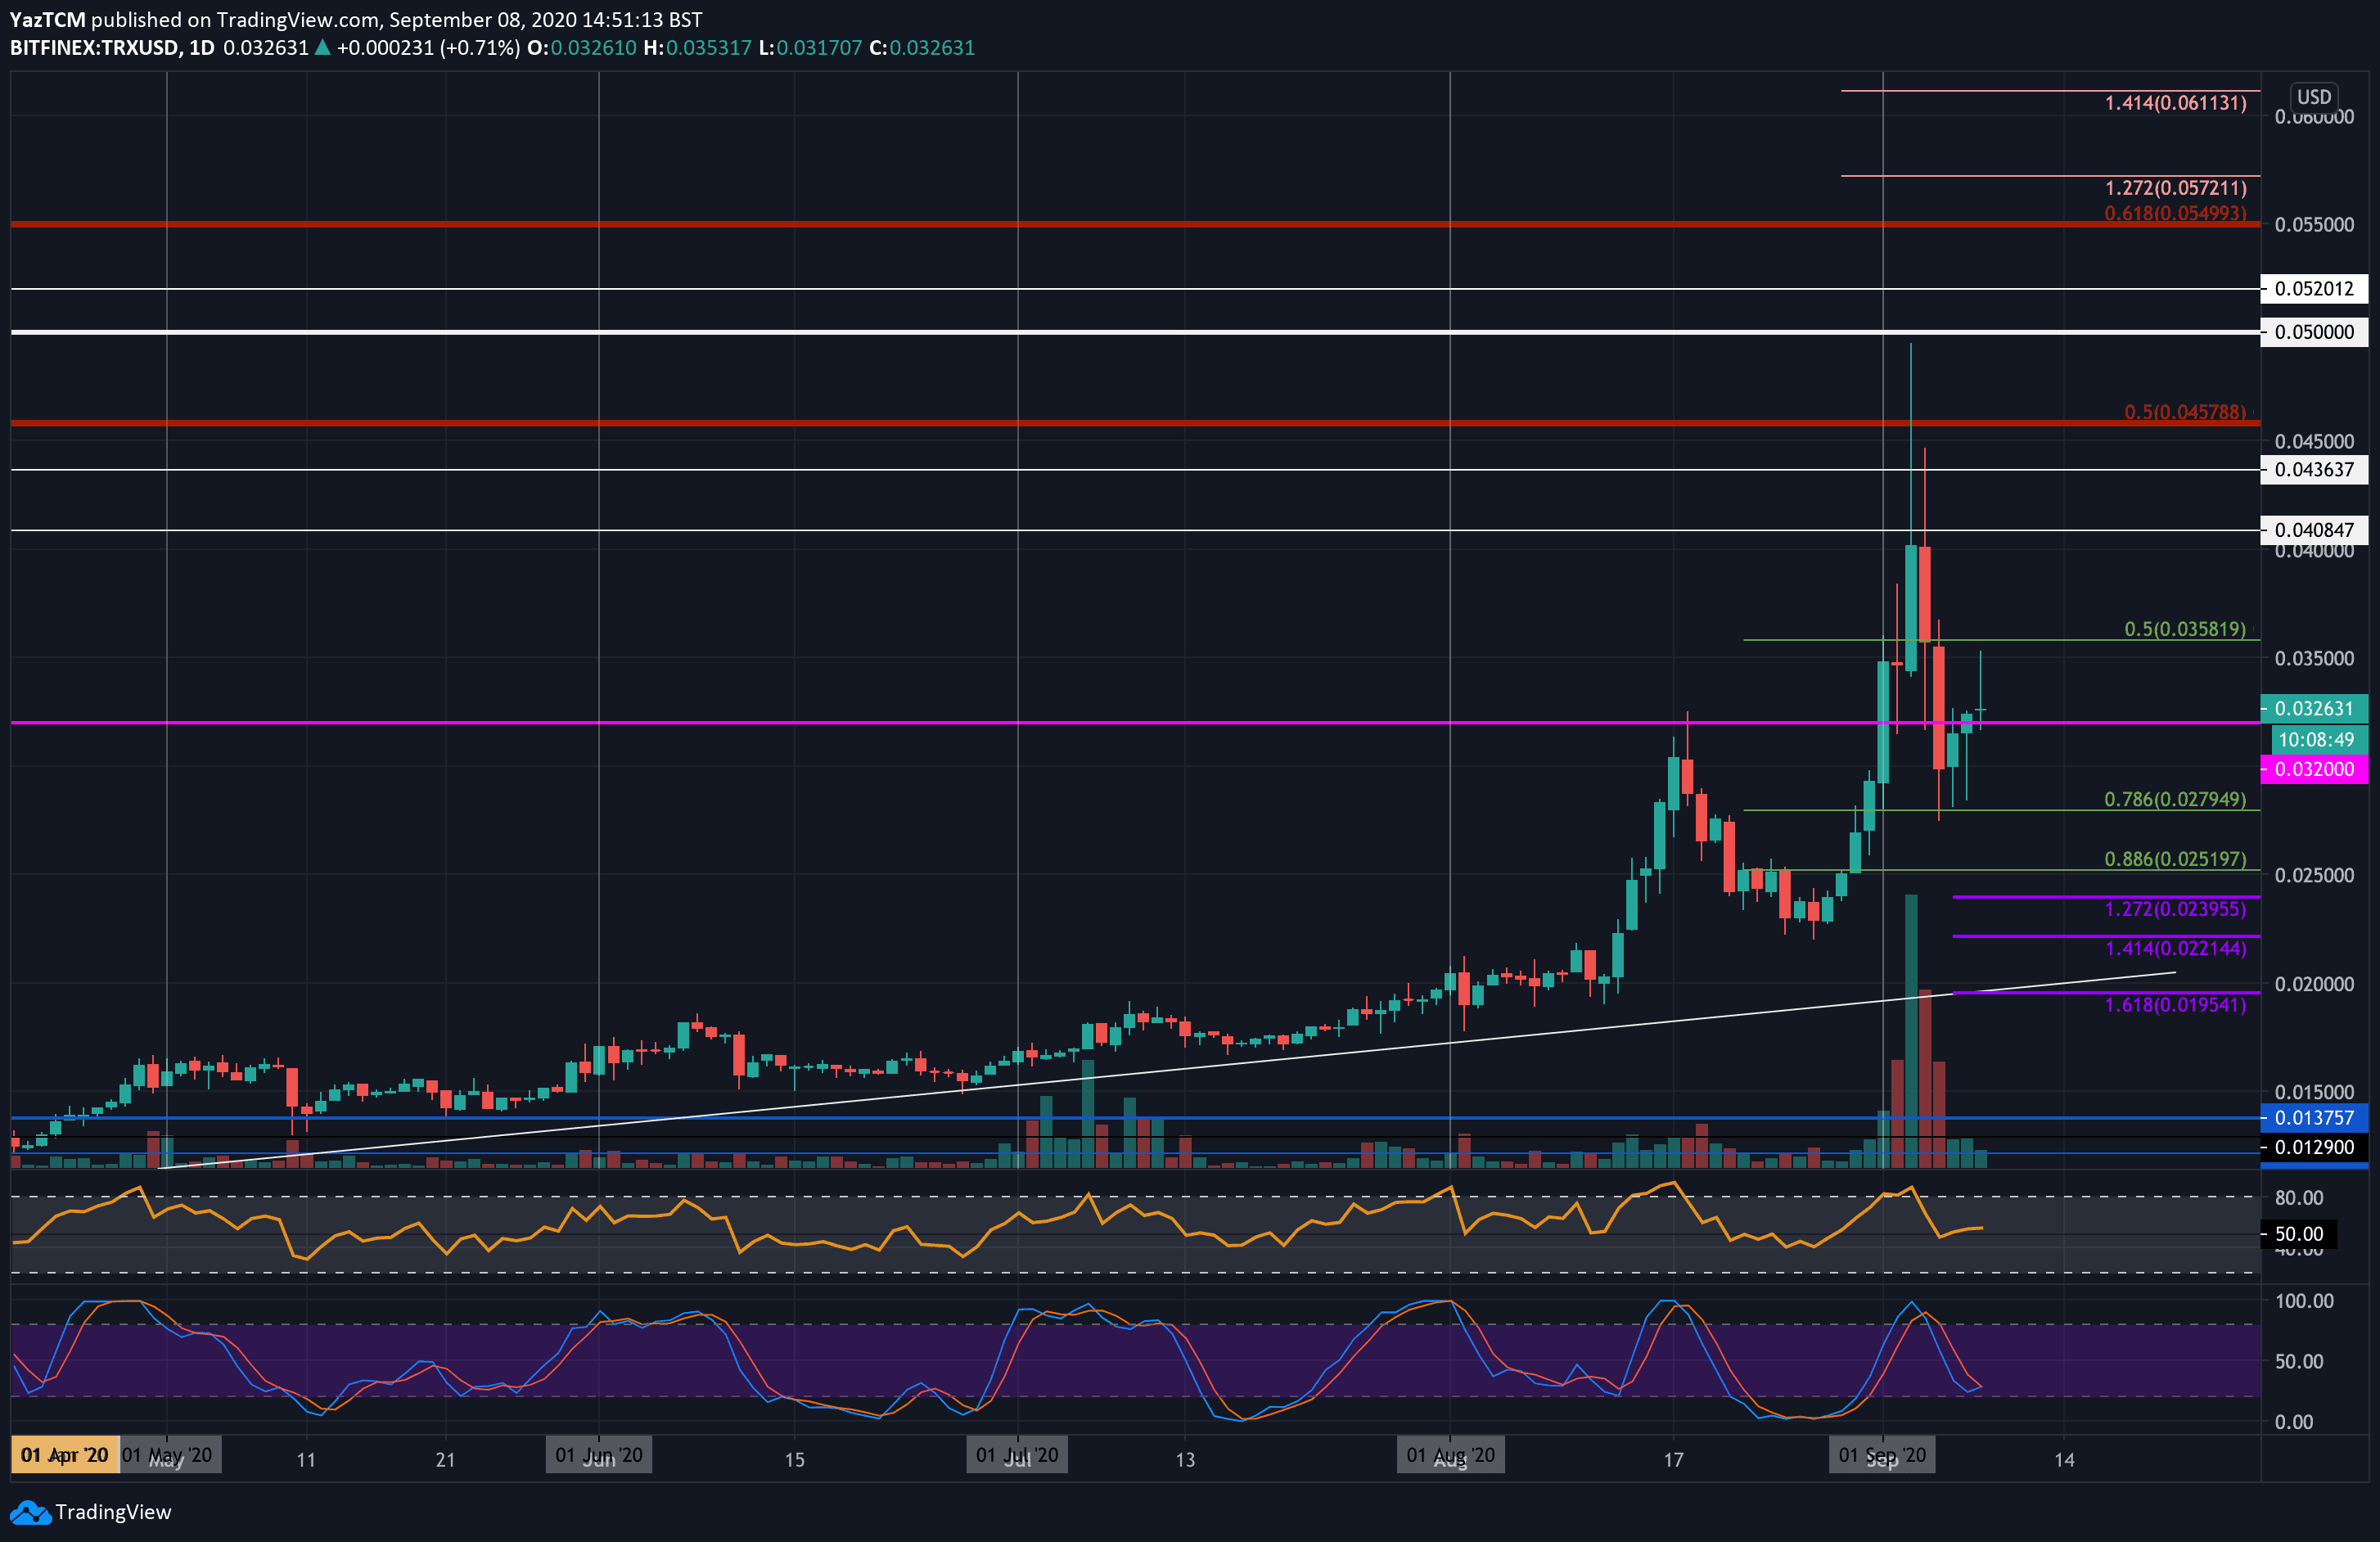 TRX Gains 12% Amid an Overall Struggling Market (TRON Price Analysis)